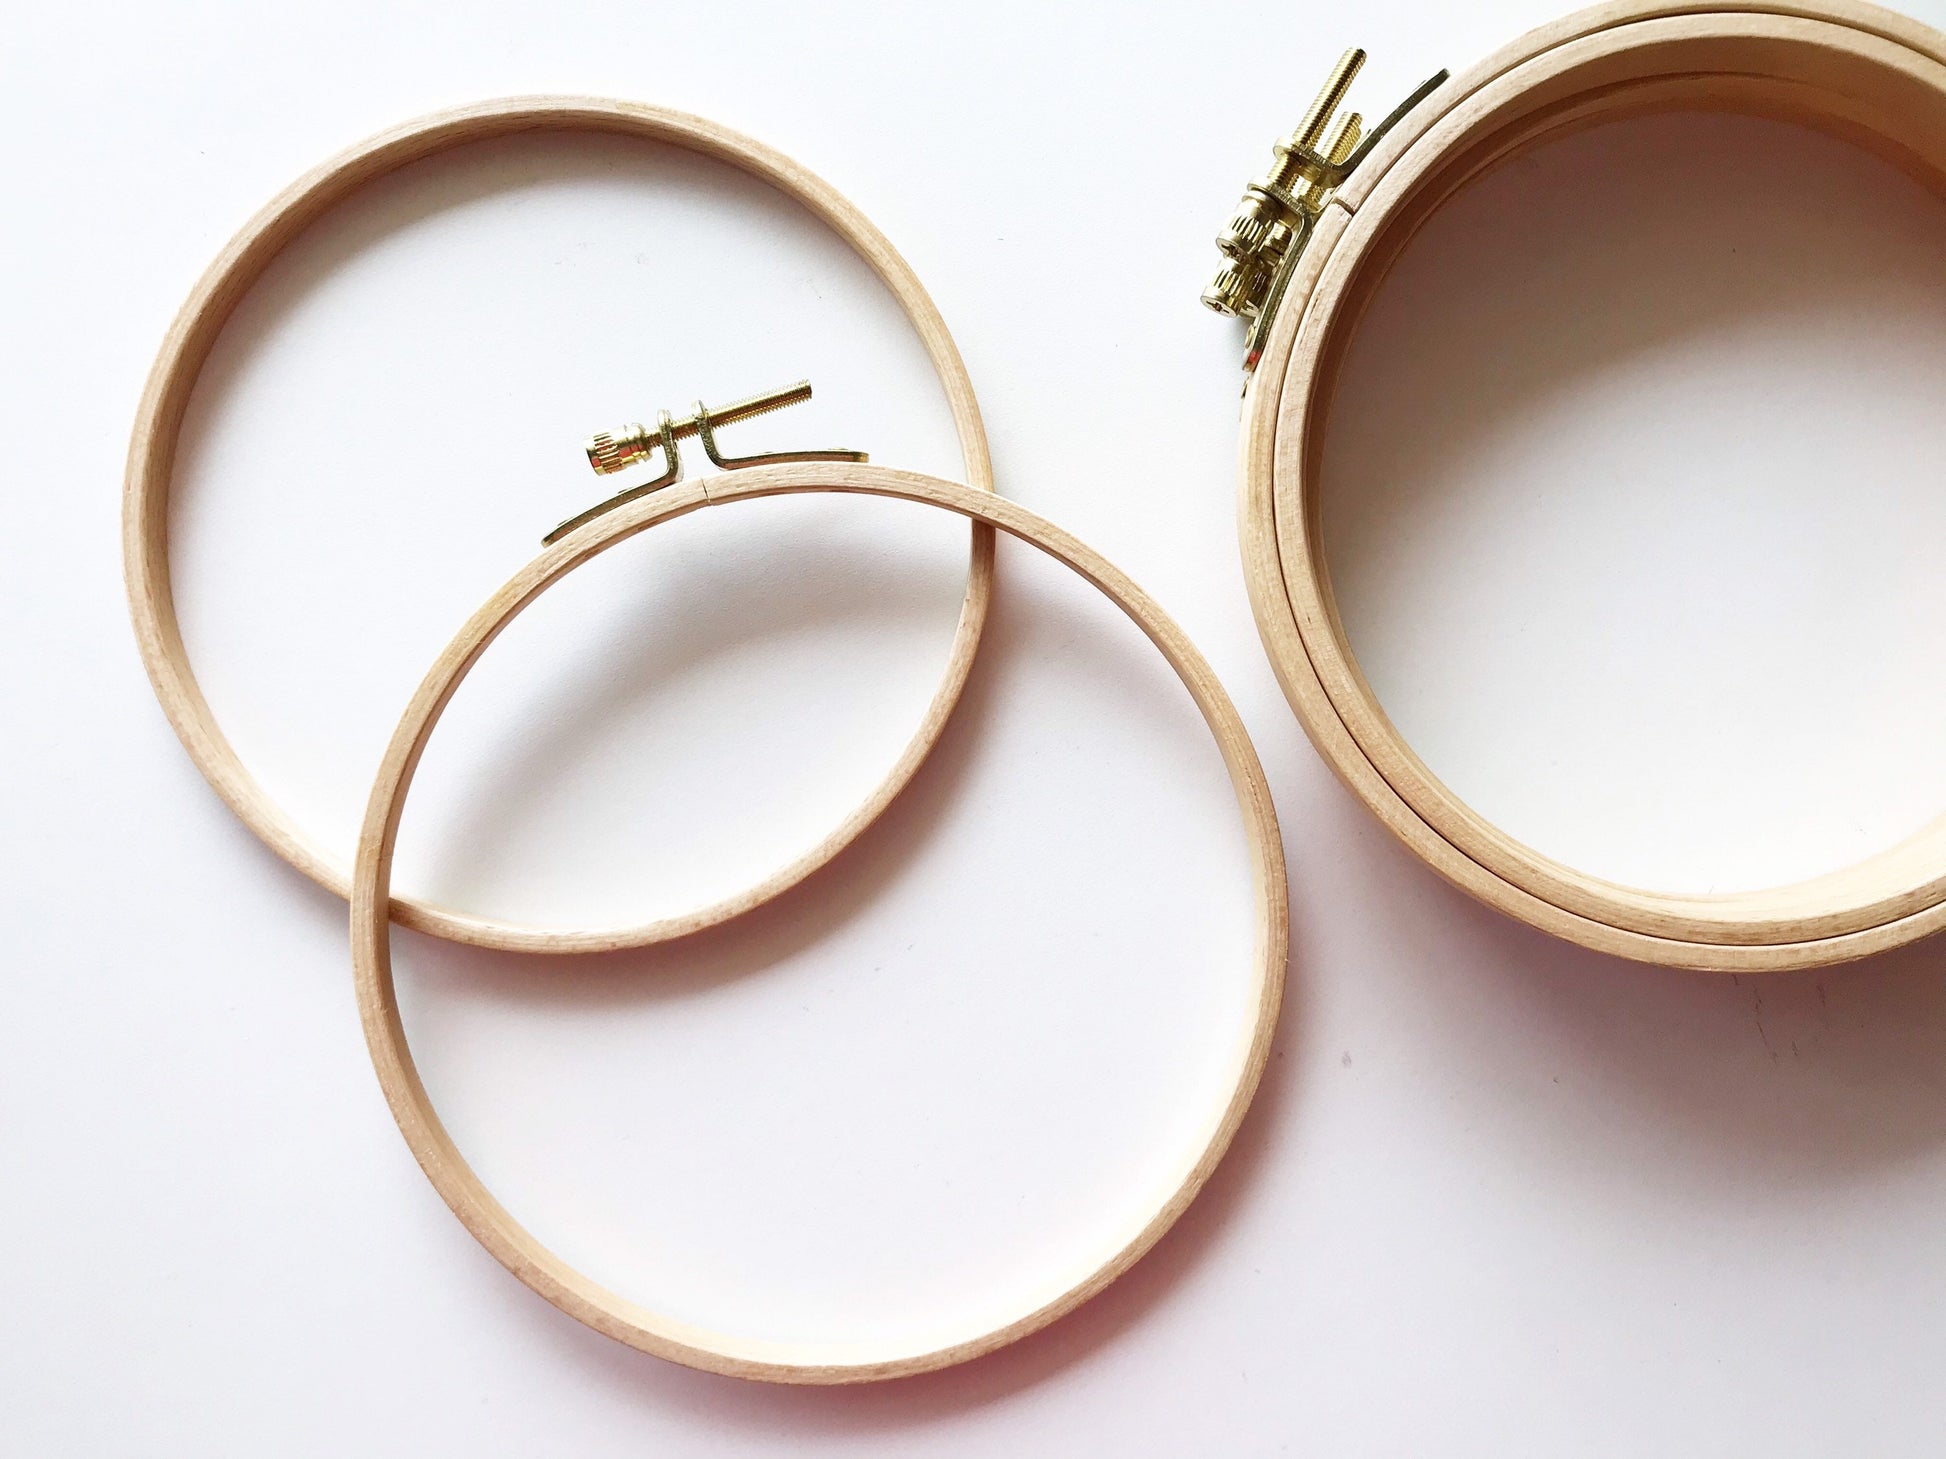 Beechwood Embroidery Hoops 3, 4, 5, 6, 7, Wood Embroidery Hoop With Golden  Screw, Cross Stitch Wooden Hoop, Embroidery Frame 